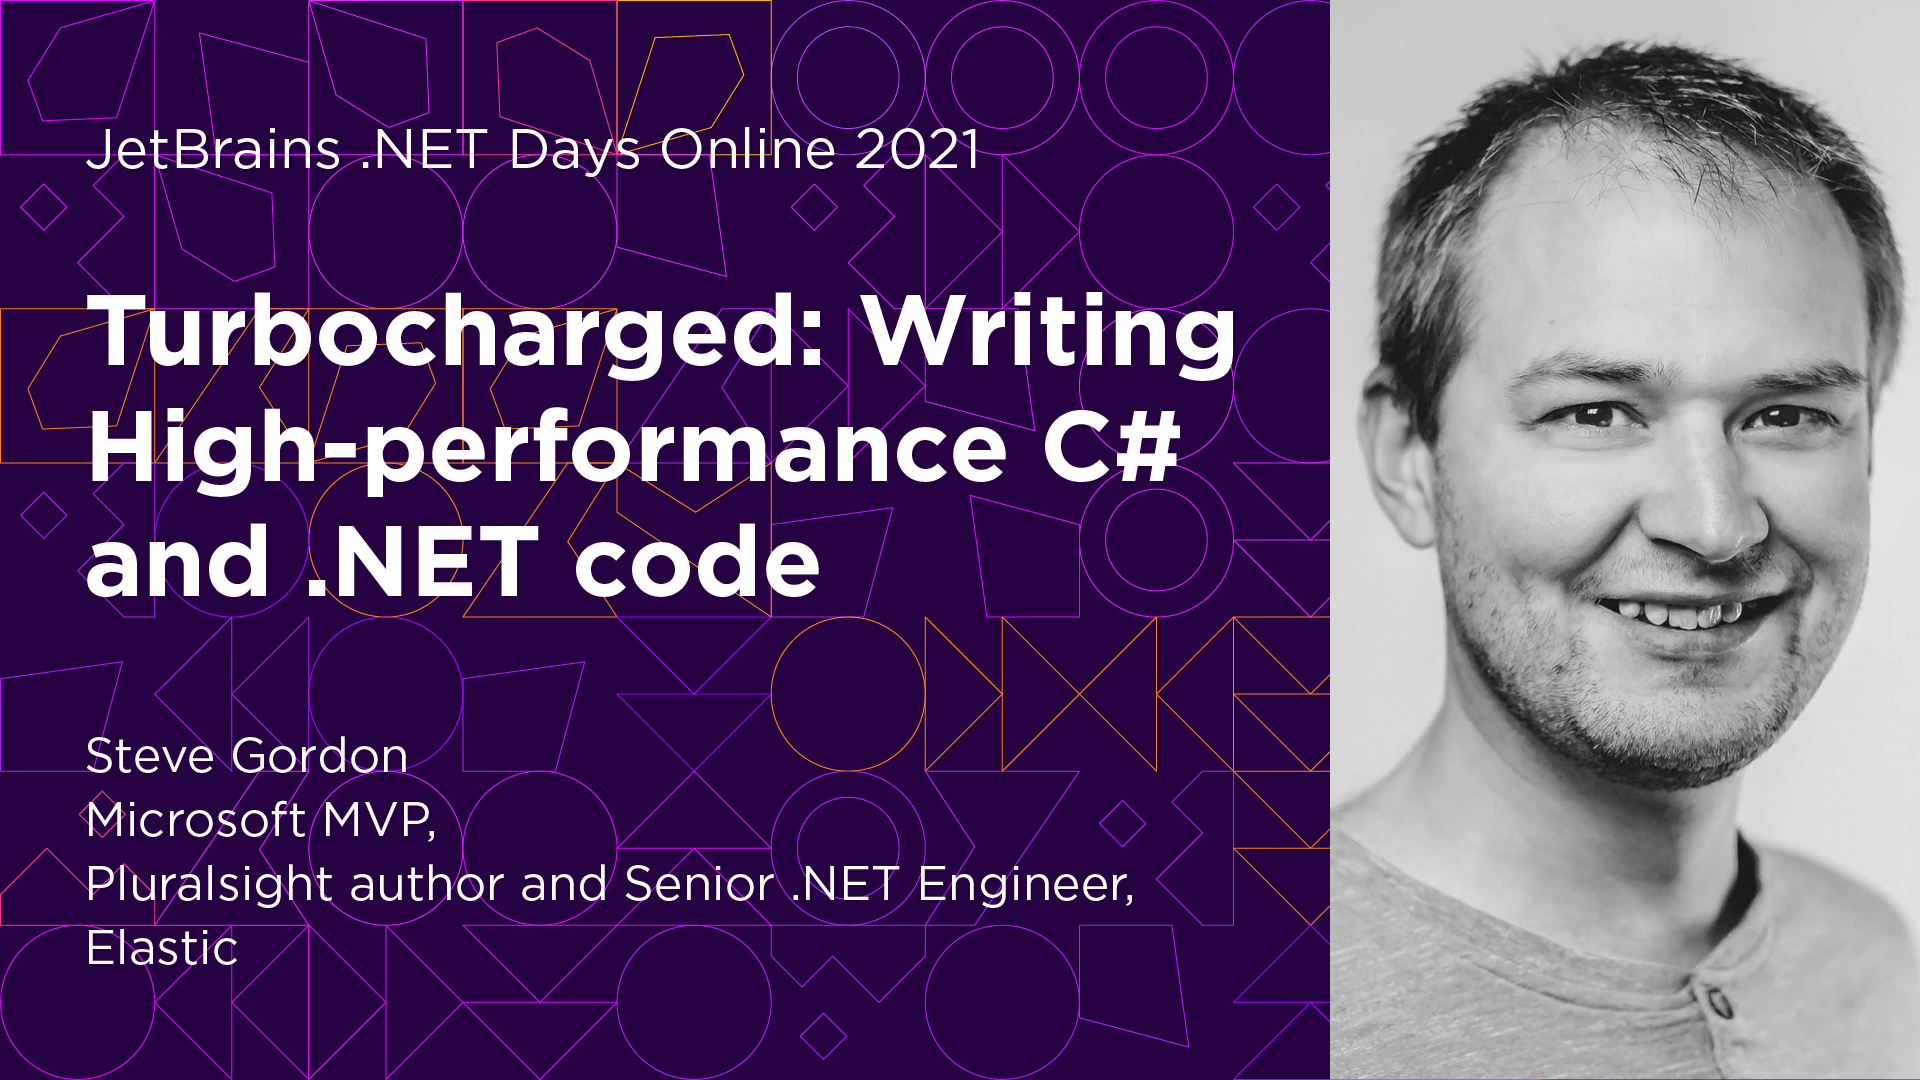 Turbocharged - Writing High-performance C# and .NET code